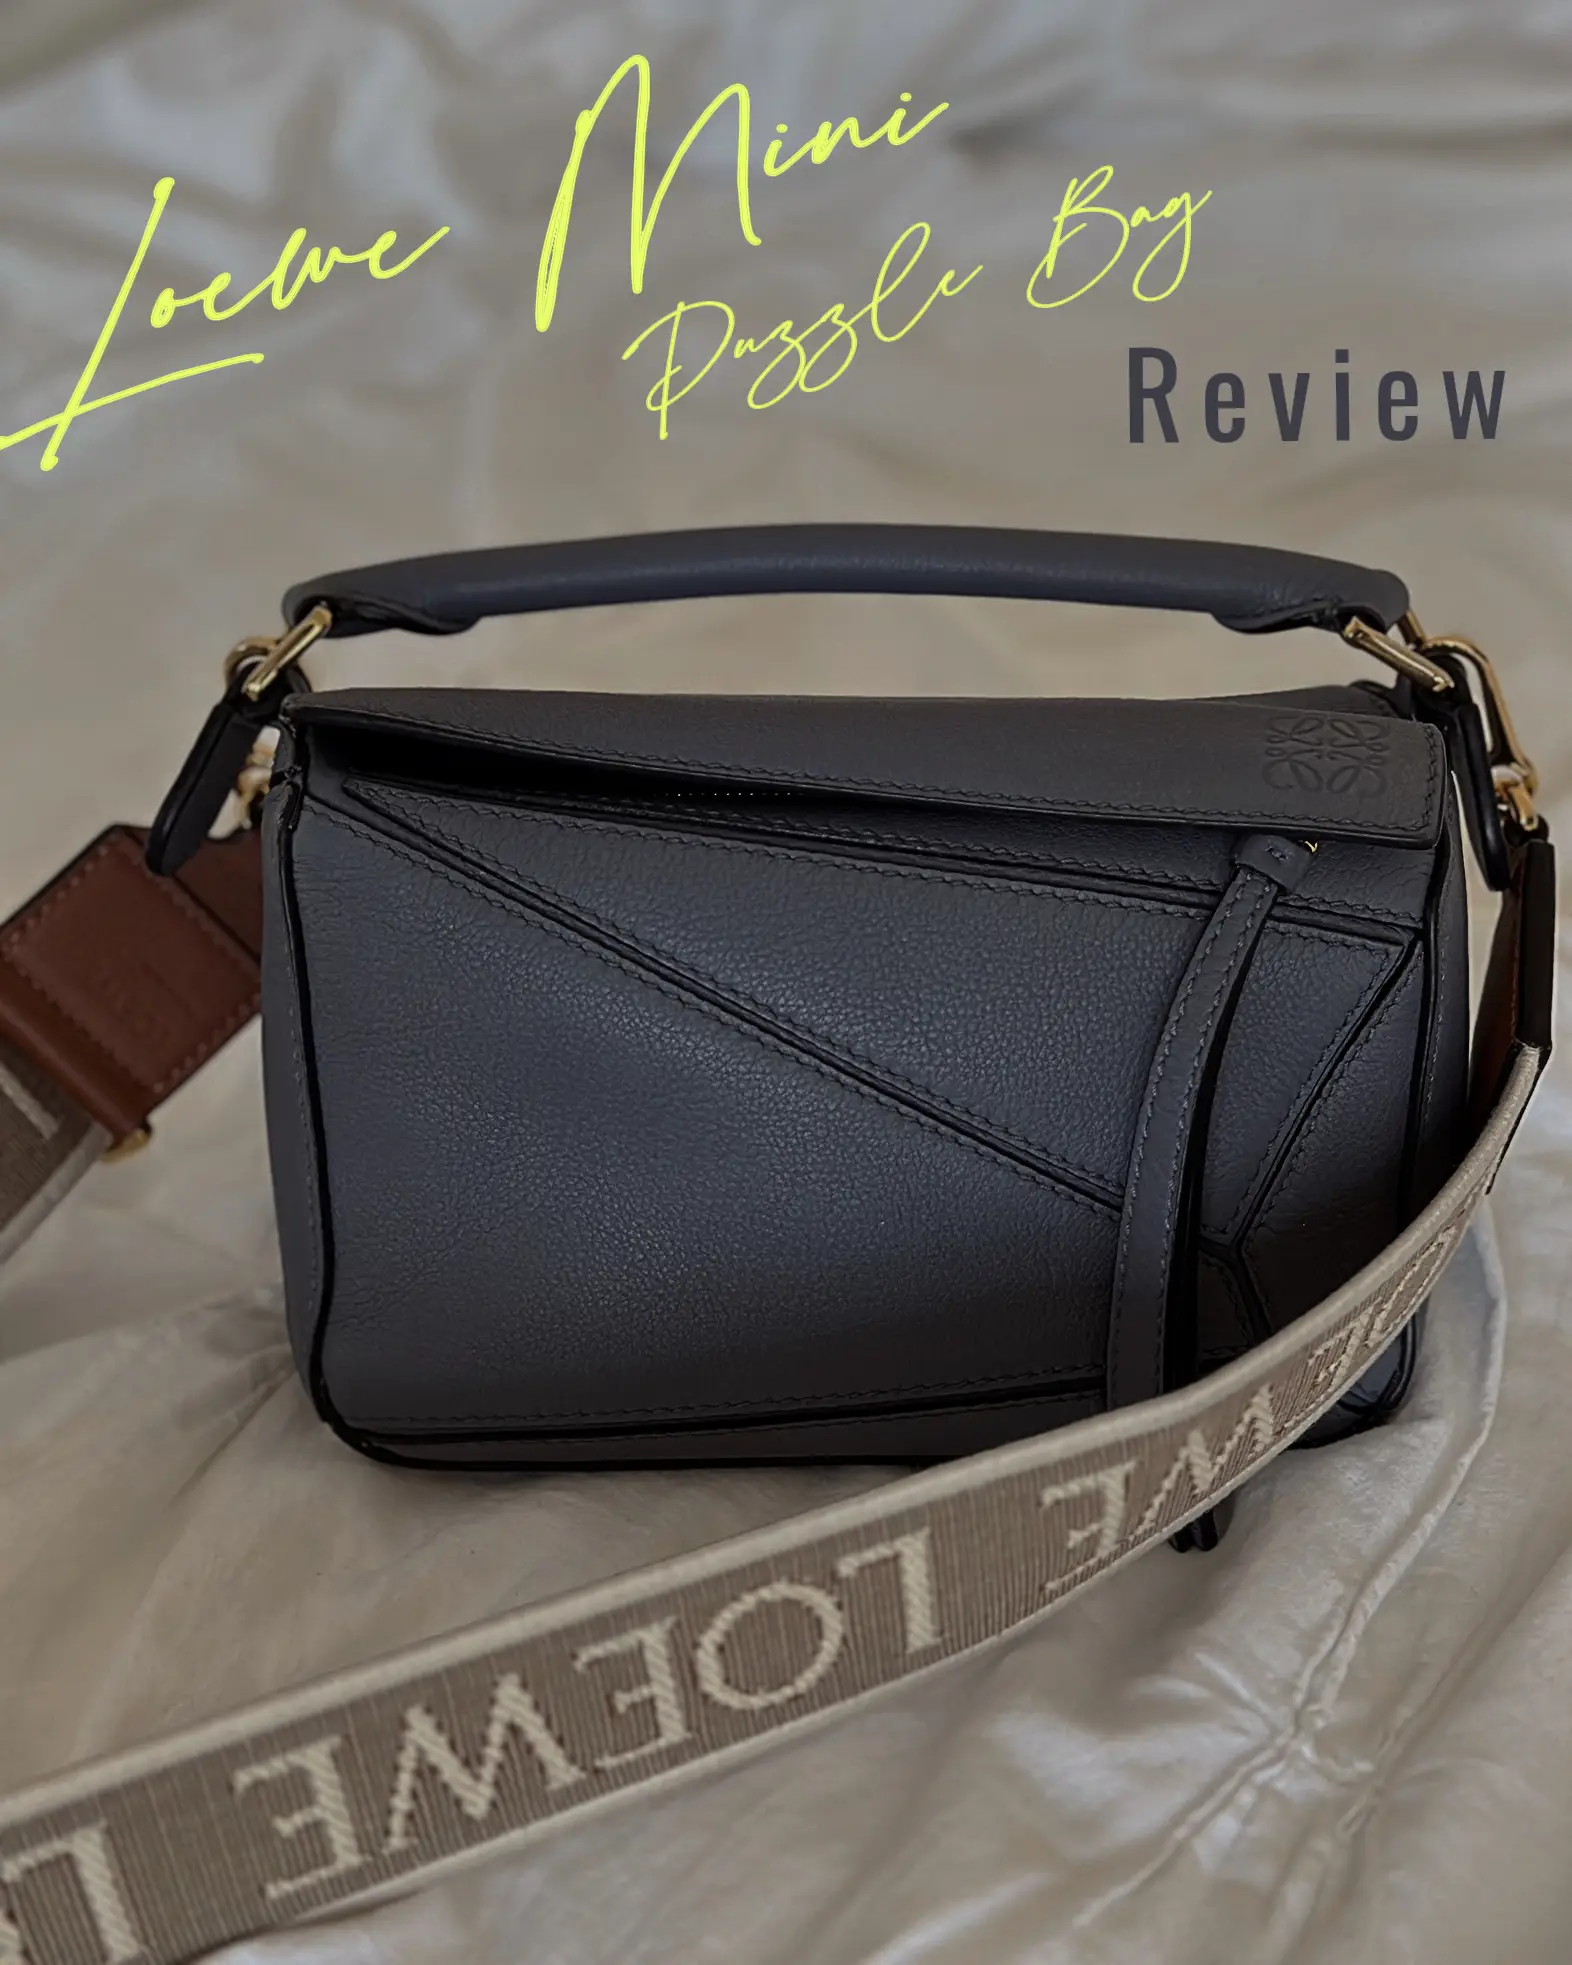 LOEWE PUZZLE BAG REVIEW  SHOULD YOU GET IT? 